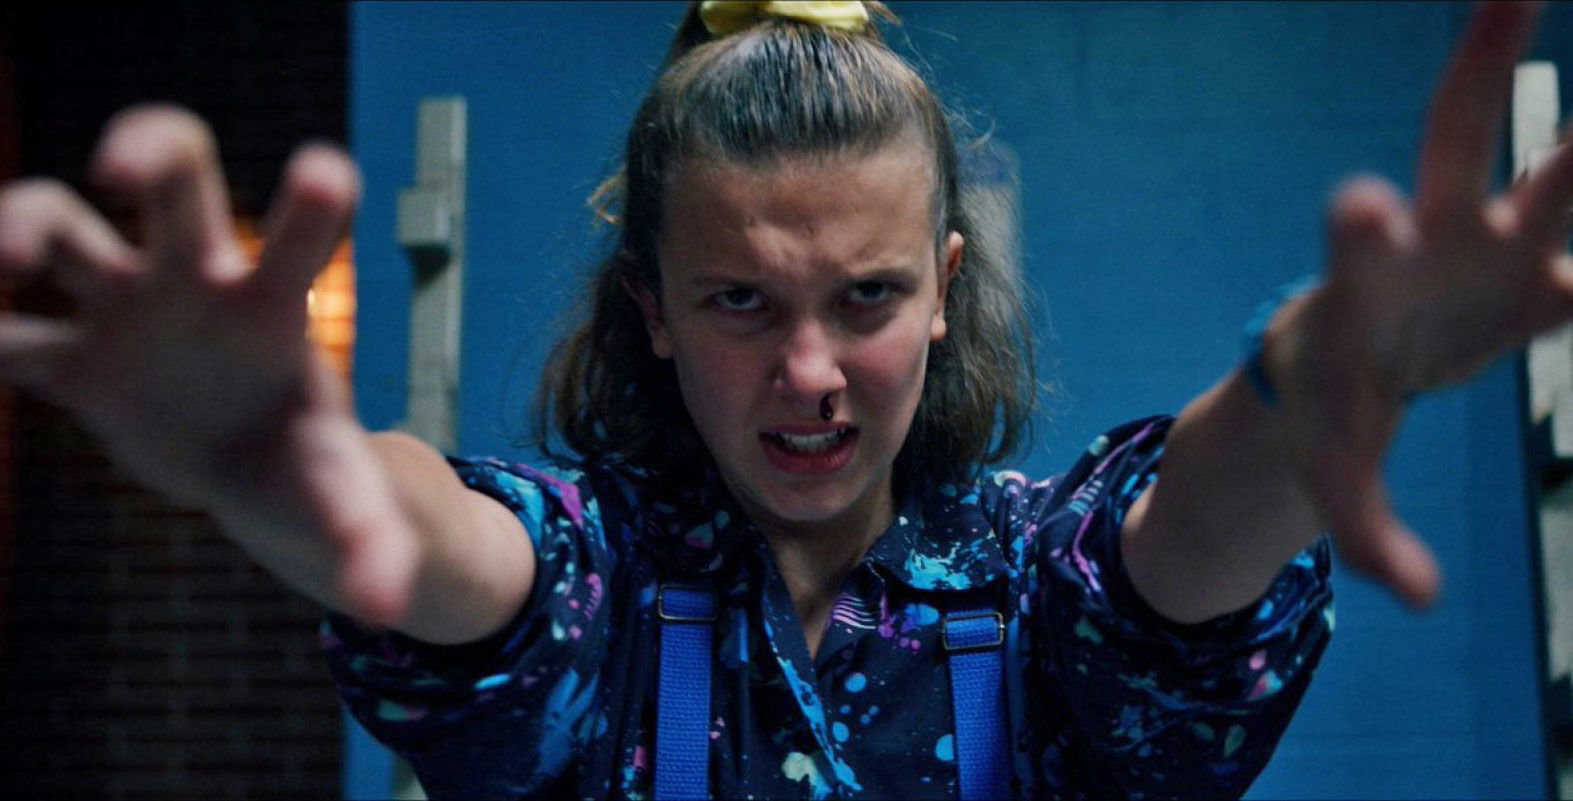 Which Two Female Netflix Characters Are You A Combo Of? Stranger Things Eleven